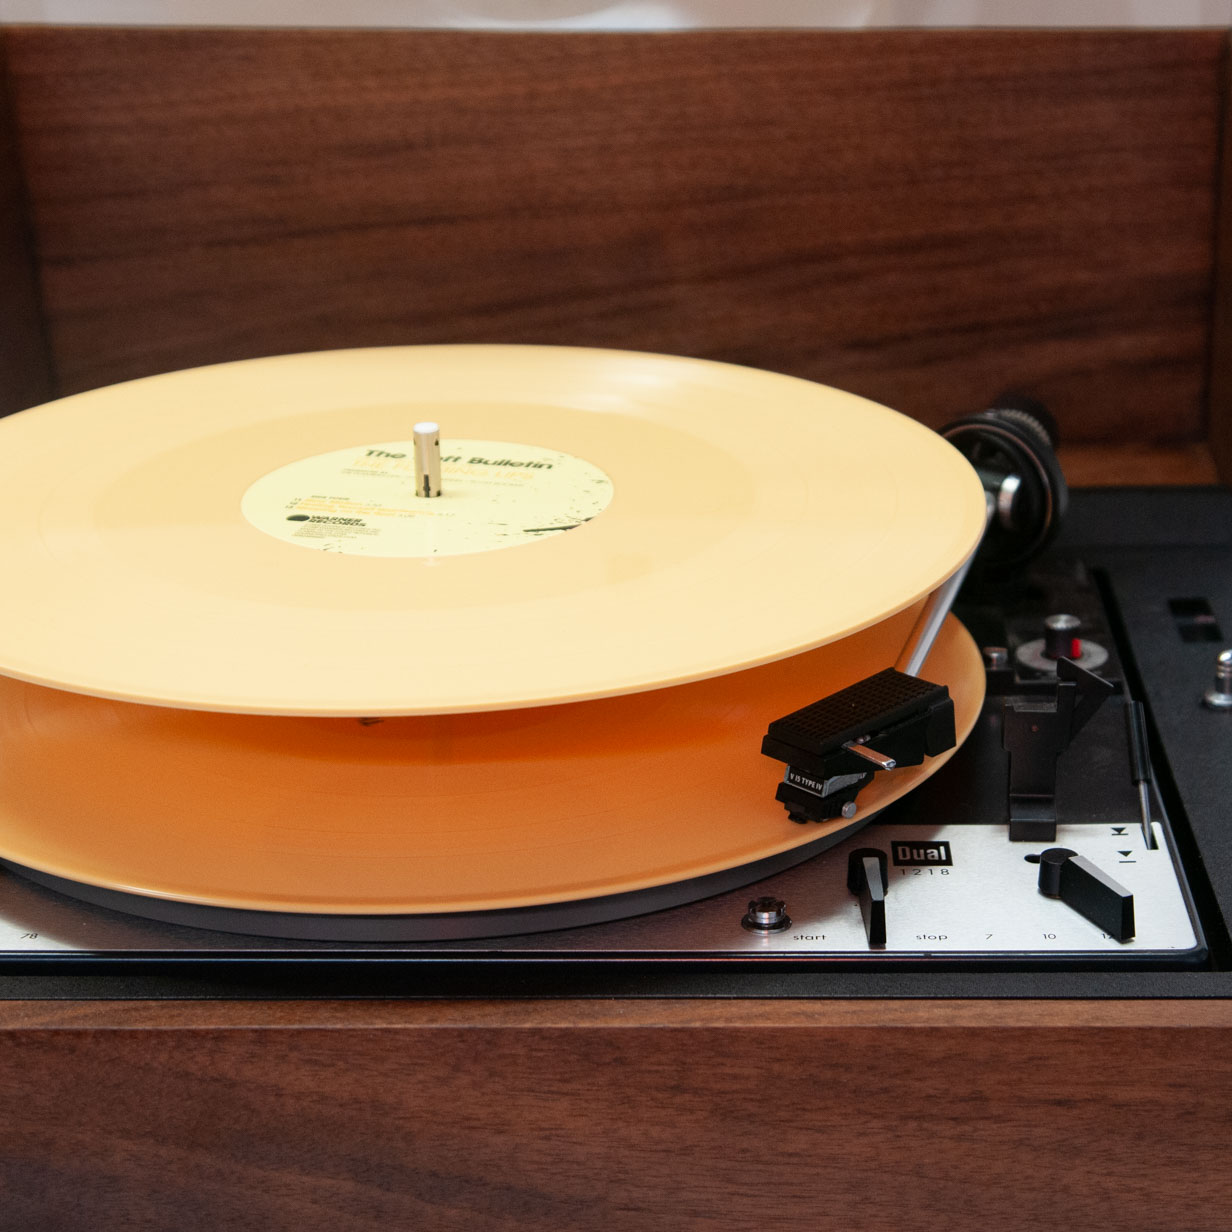 Front view of turntable showing two records stacked in changer mode